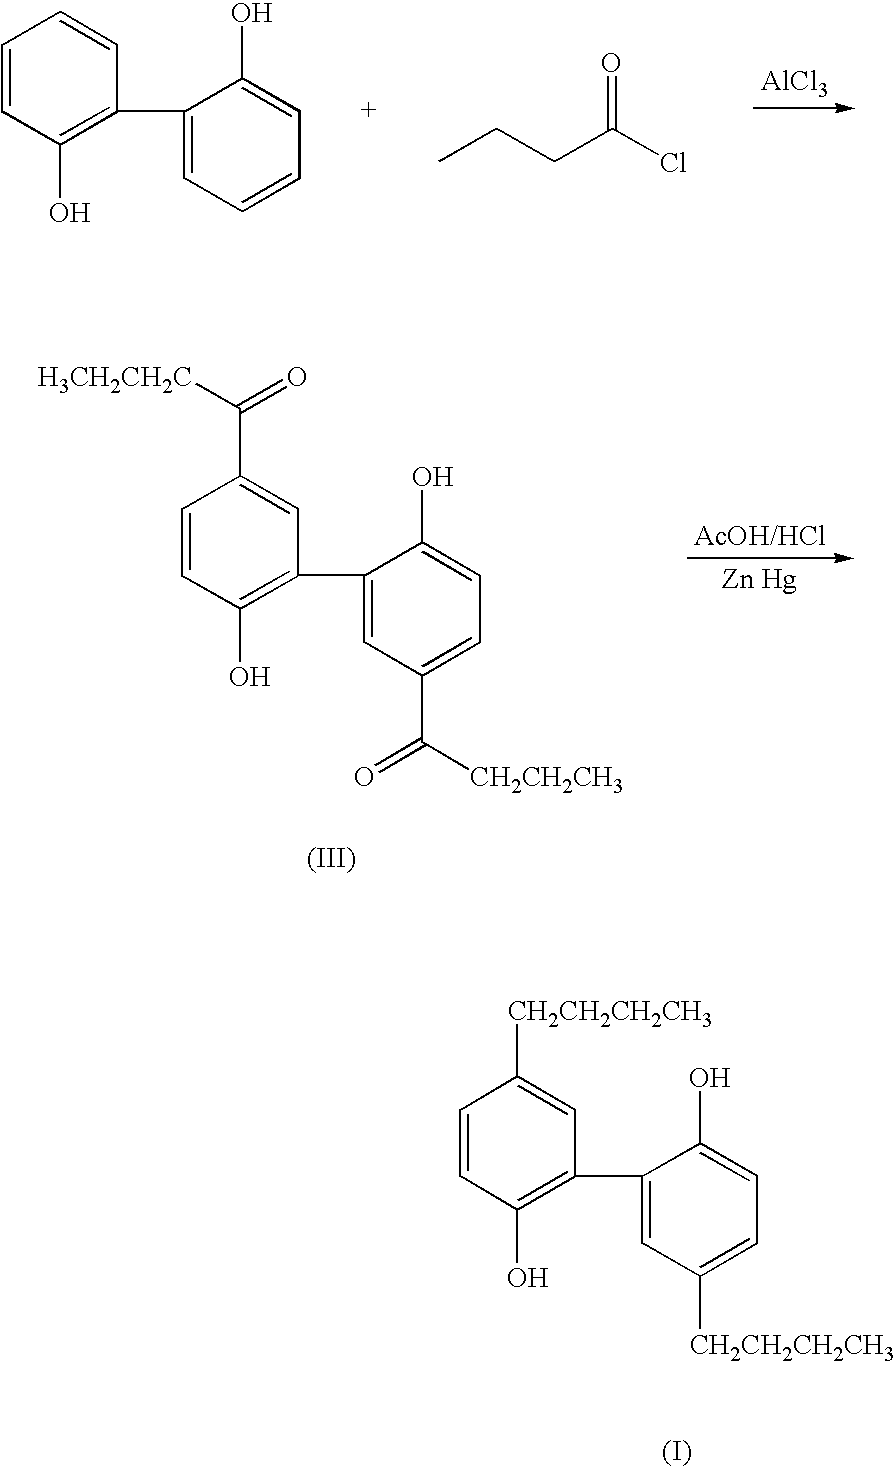 Oral compositions containing biphenol antibacterial compounds